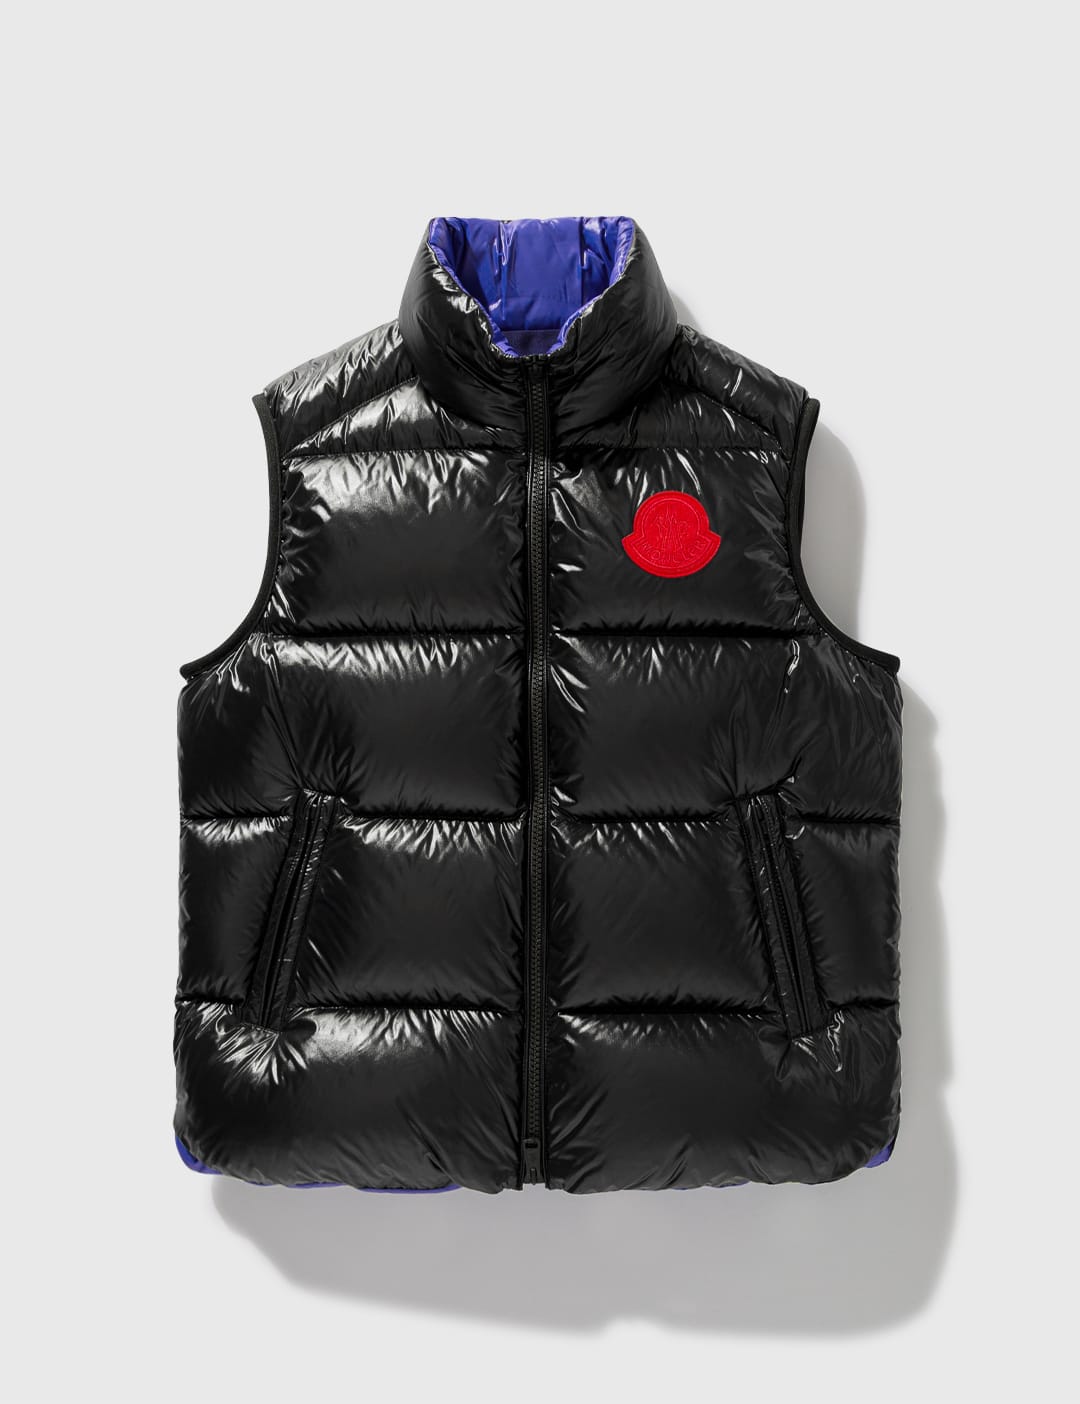 Moncler Genius - 2 Moncler 1952 Sumido Vest | HBX - Globally Curated  Fashion and Lifestyle by Hypebeast